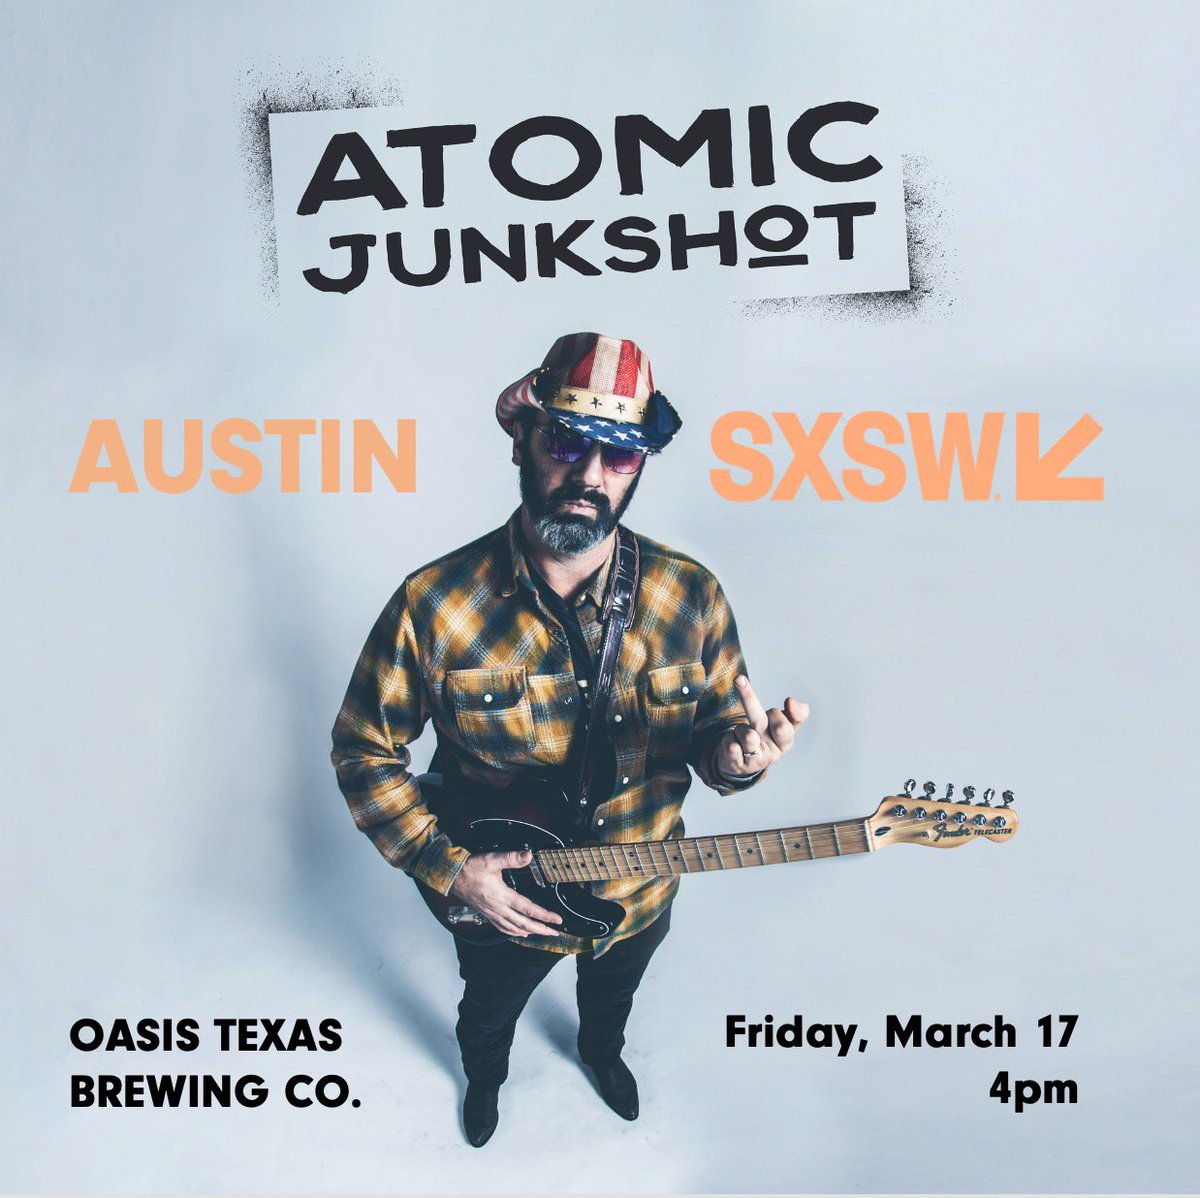 Friday. Austin. Hell yeah 

#outlawcountry #southernrock #honkytonk #rocknroll #rock #rockmusic #altcountry #reddirtcountry #roots  #americana #altcountrymusic  #countrymusic #livemusic #reddirtcountrymusic #countryrock  #reddirtmusic #austinmusic #texasmusic #sxsw